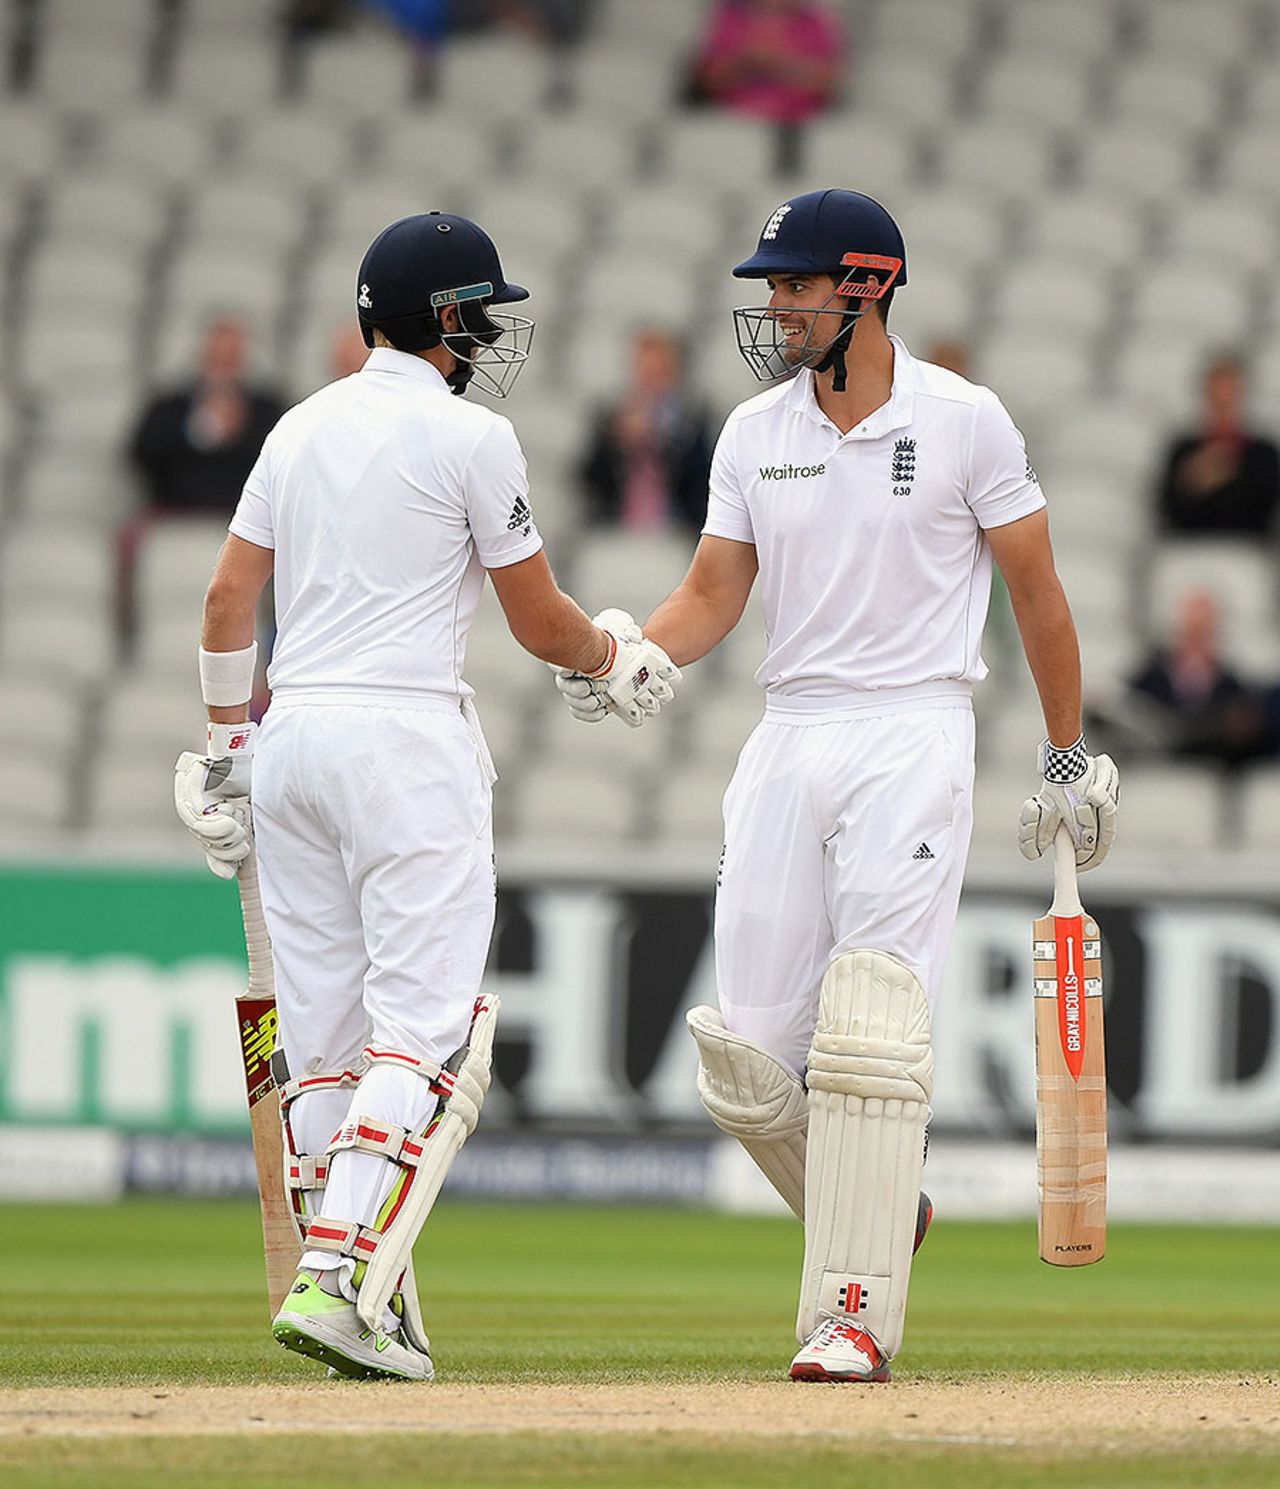 Alastair Cook and Joe Root extended their second-wicket stand, England v Pakistan, 2nd Investec Test, Old Trafford, 4th day, July 25, 2016